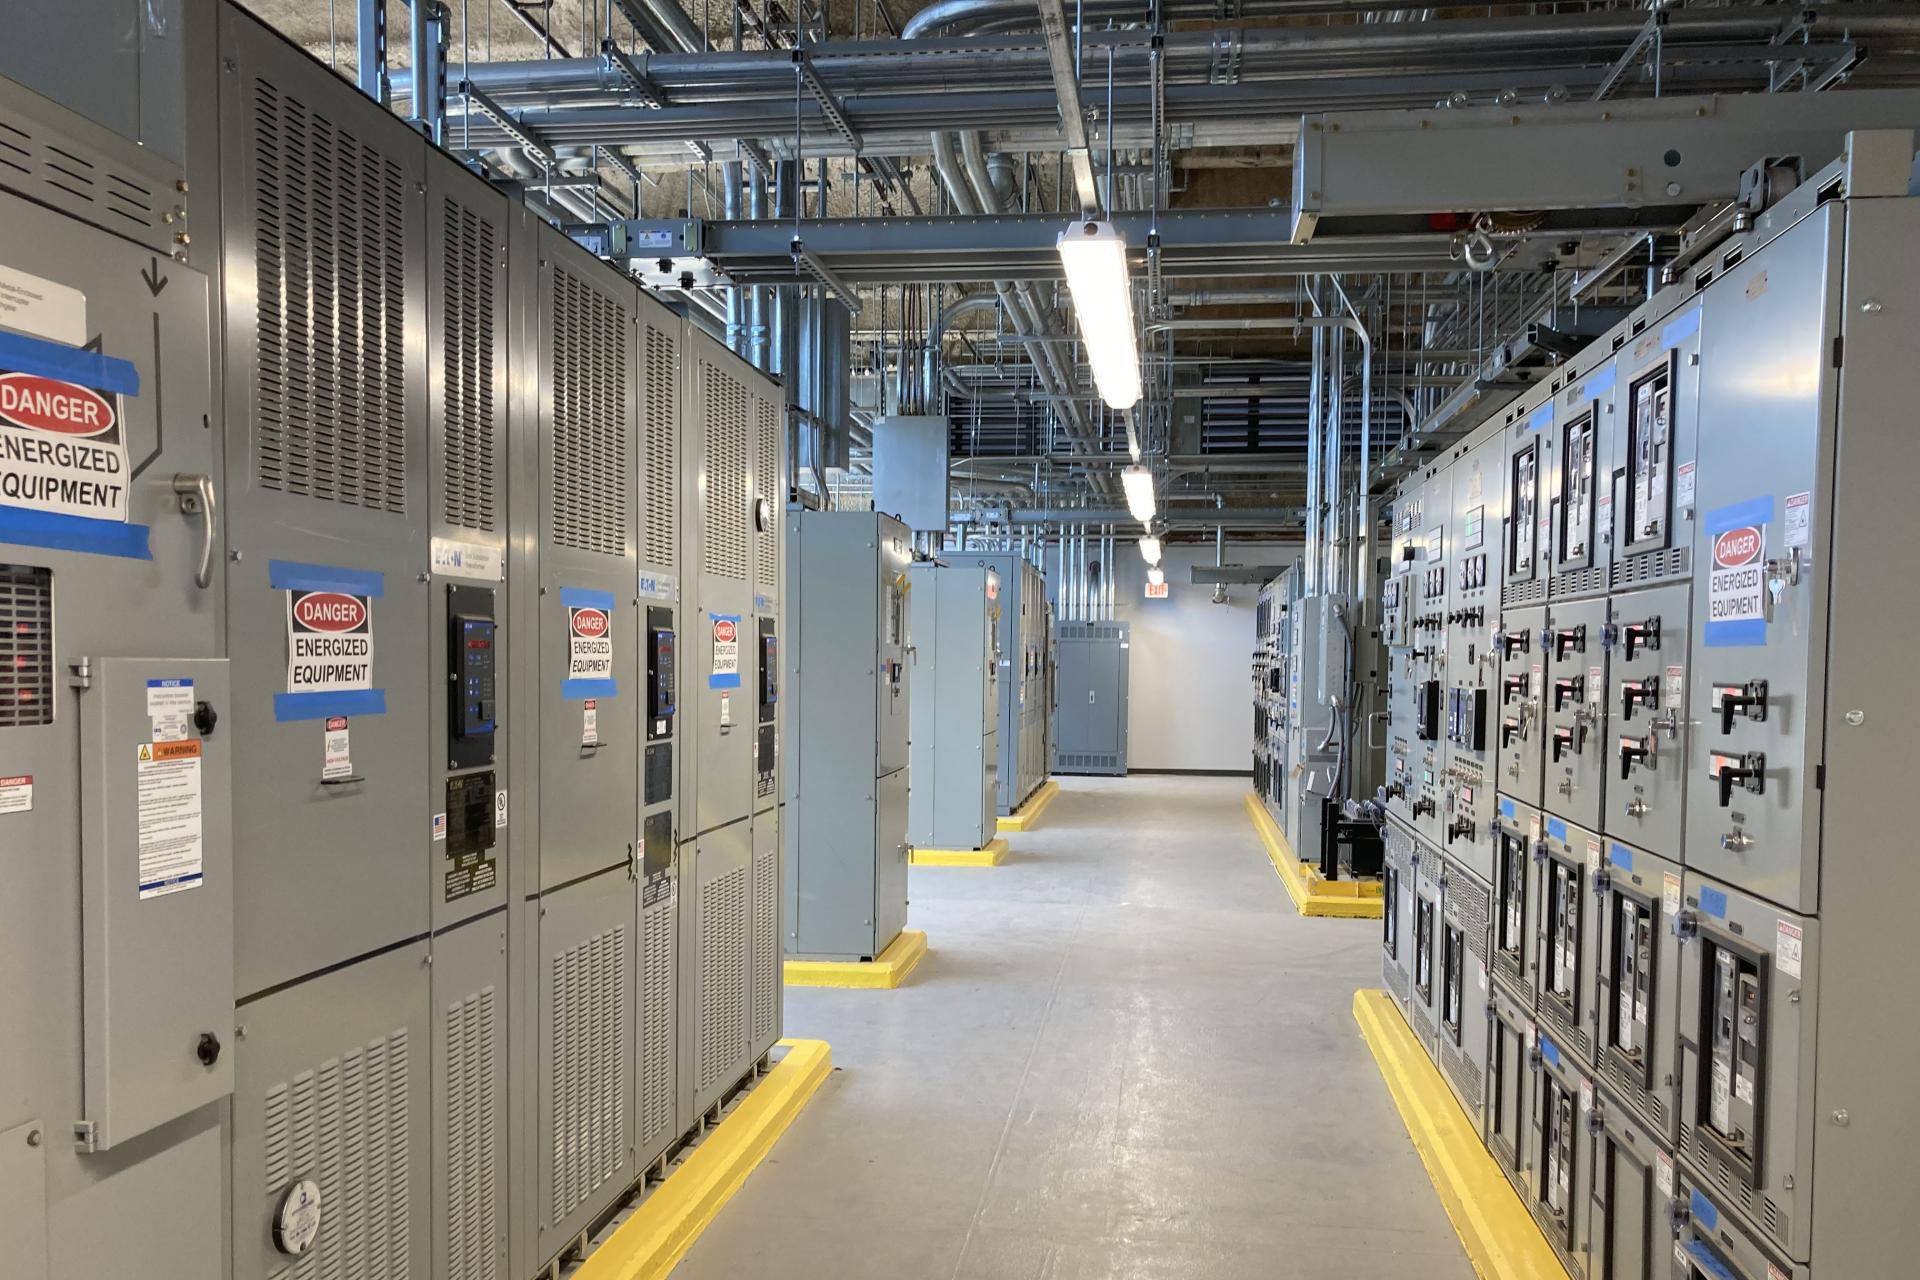 Logically arranged switchgear and distribution equipment